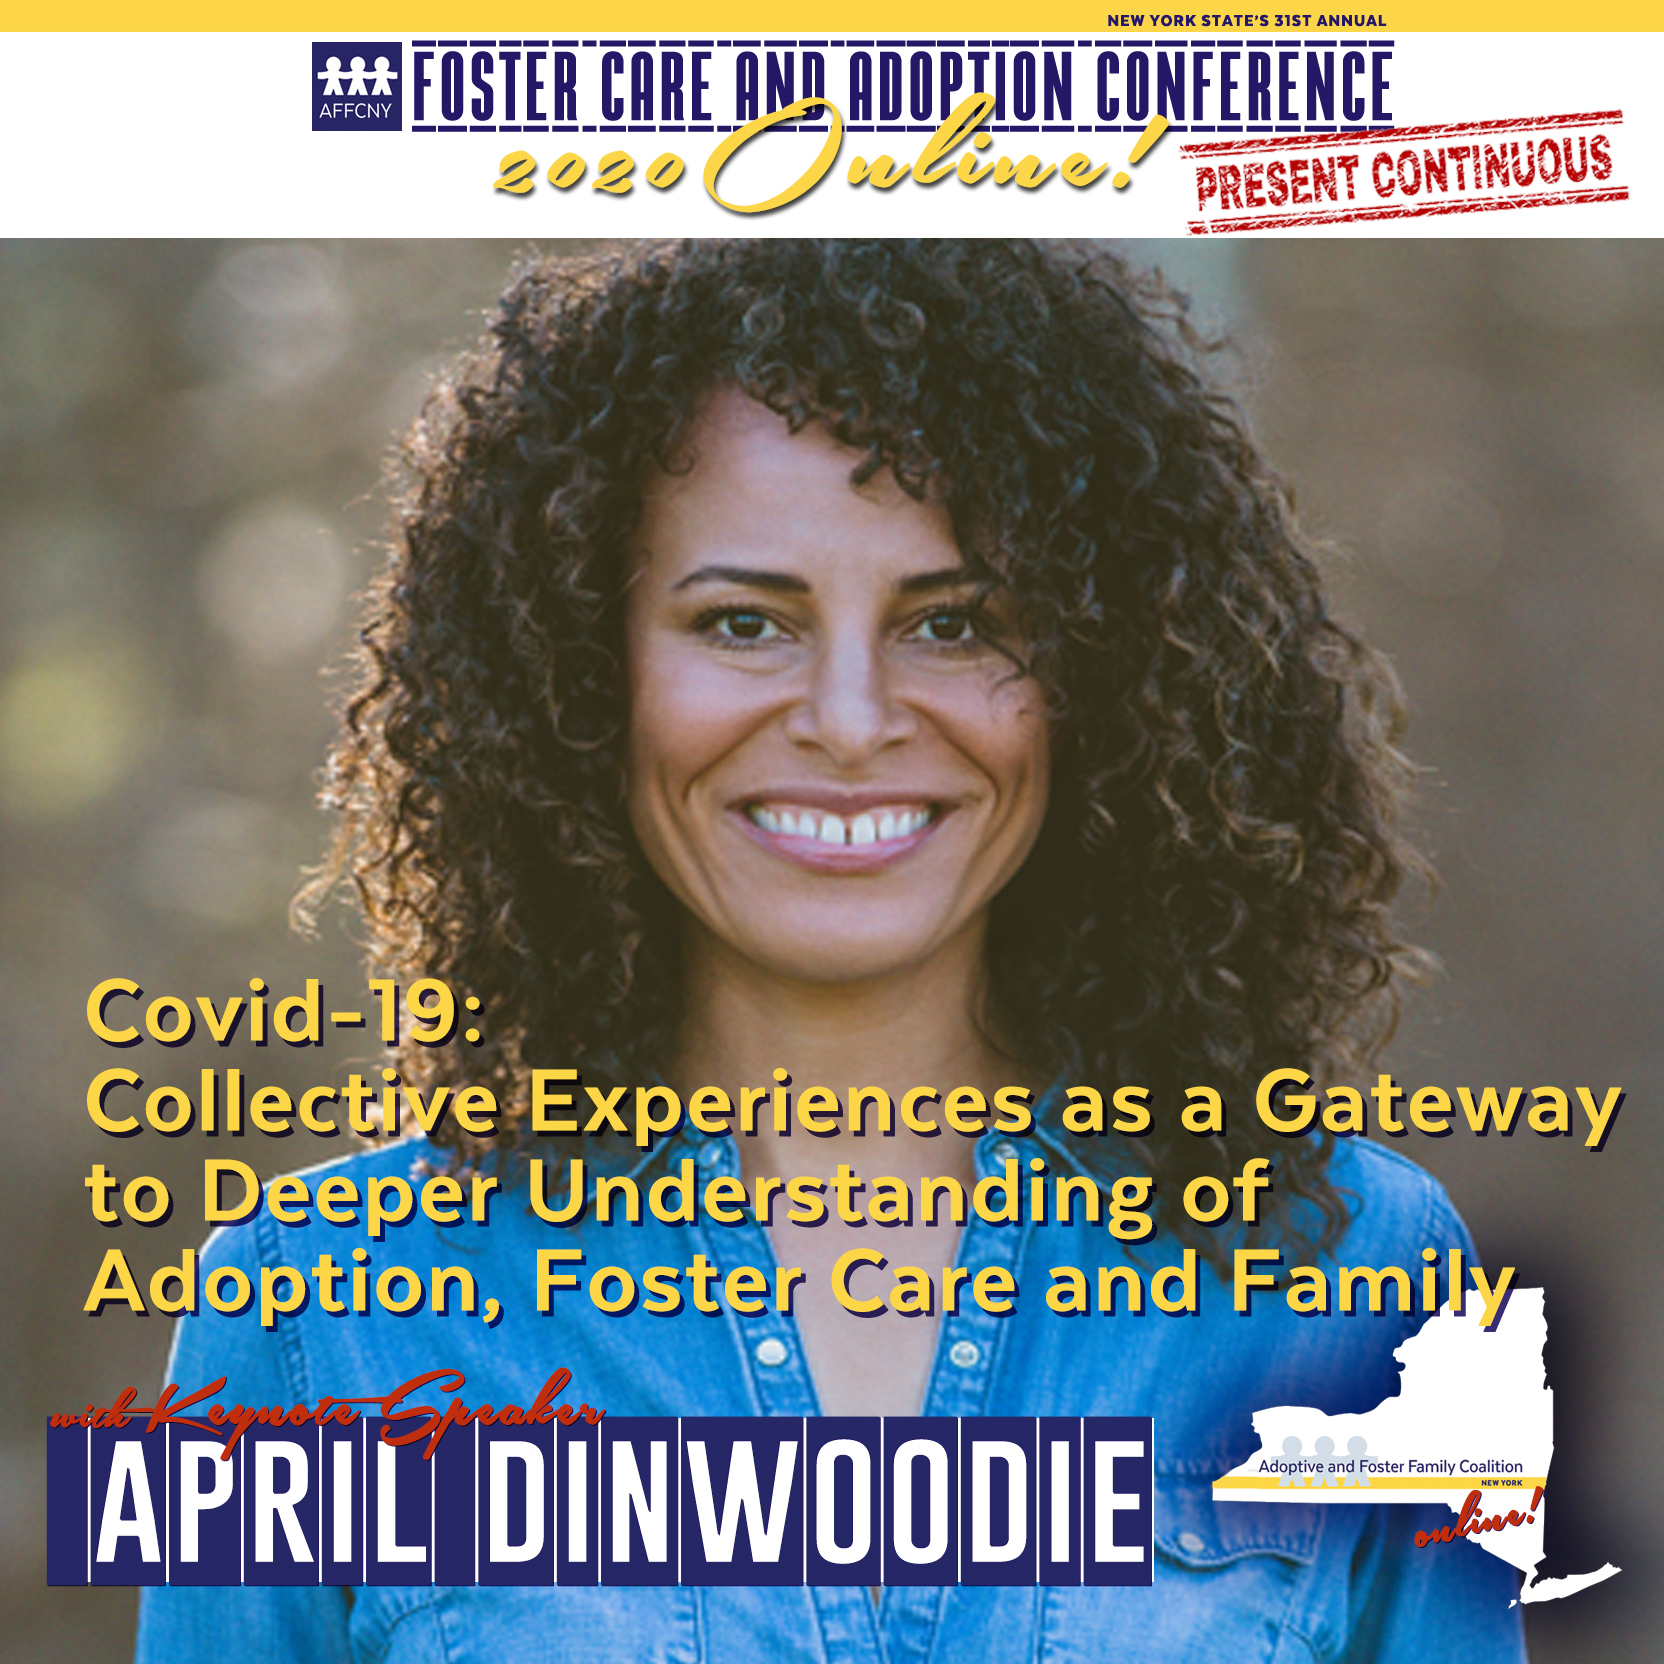 PROGRAMS ADOPTION FOSTER & KINSHIP CARE RESOURCES AND SUPPORTS DIRECTORY DONATE SIGNUP Our Programs Home»Our Programs»Best Practices Training Academy»NYS’S Foster Care and Adoption Conference ONLINE Search for: Search CONFERENCE HOME REGISTER SCHEDULE KEYNOTES Same Three FOUR! Keynote Speakers. Same Two Days LIVE ONLINE. One Totally Different Coalition Conference. Join us! LIVE ONLINE! Plus On Demand Video Access and Membership in the Coalition’s Conference Community Environment Our Online Conference Keynote Speakers Bryan Post Bryan Post presents “2020 Vision: Through the Lens of Adoption, Foster Care, and Trauma” FRIDAY, MAY 29th | 10 AM to 12 PM EST JaeRan kim Bryan Post is a renowned clinician, lecturer, and author who focuses on the treatment of emotional and behavioral disturbance in children with trauma. As founder of the Post Institute for Family-Centered Therapy, he specializes in a holistic family-based treatment approach that addresses the underlying interactive dynamics of the entire family. The Post Institute works with adults, children and families struggling with early life trauma and the impact on the development of the mind/body system. Bryan has been researching child behavior and finding solutions for a small niche of kids “with whom nothing works”. He has worked in the trenches for the last 15 years with children in the last resort category, as well as training parents and professionals in a new paradigm of parenting which he calls The Stress Model. This new model is in direct opposition to traditional parenting and societal behavior modification programming, which he considers as beyond consequences, logic and control. He holds three degrees in the field of social work: a Bachelors of Social Work degree from East Central University in Ada, Oklahoma; a Masters of Social Work degree from the University of Texas at Arlington; and a Doctoral degree in Social Work from Columbus University School of Public Administration. A retired Licensed Clinical Social Worker, Bryan continues spreading his loved based parenting message through his lecturing and writing. He lives with his family in Oklahoma. WATCH ON YOUTUBE THE POST INSTITUTE BRYAN ON FACEBOOK FROM FEAR TO LOVE BOOK BEYOND CONSEQUENCES GREAT BEHAVIOR BREAKDOWN April Dinwoodie April Dinwoodie presents “Covid-19: Collective Experiences as a Gateway to Deeper Understanding of Adoption, Foster Care, and Family”